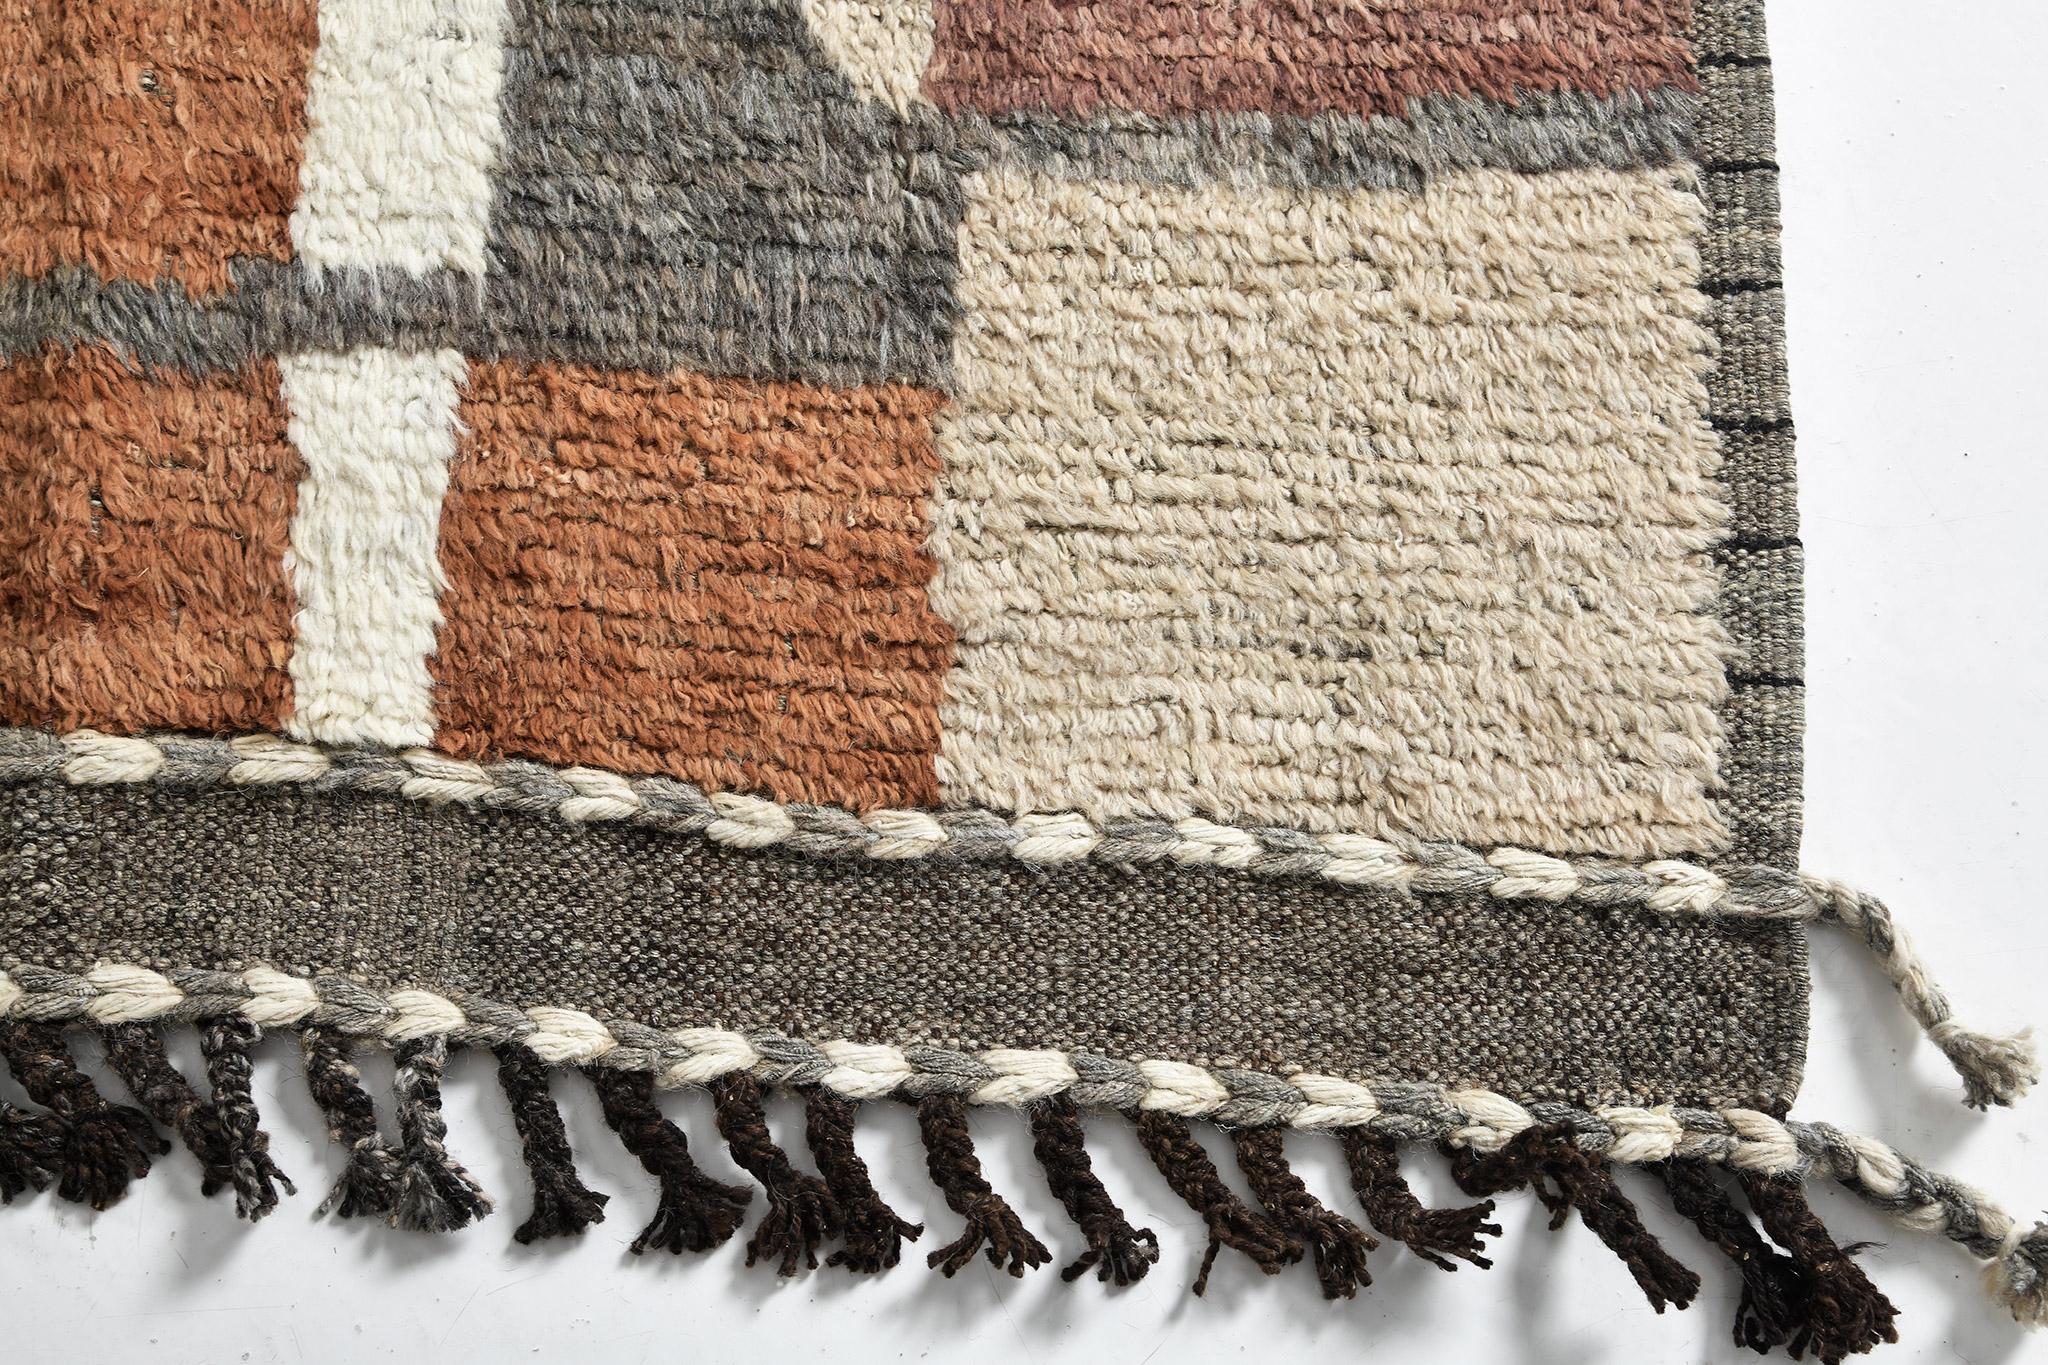 Lijzara' is a multicolored luxurious wool masterpiece. Its weaving of vibrant colors into irregular shapes and its timeless design elements is what makes the Atlas Collection so unique and sought after. Mehraban's Atlas collection is noted for their